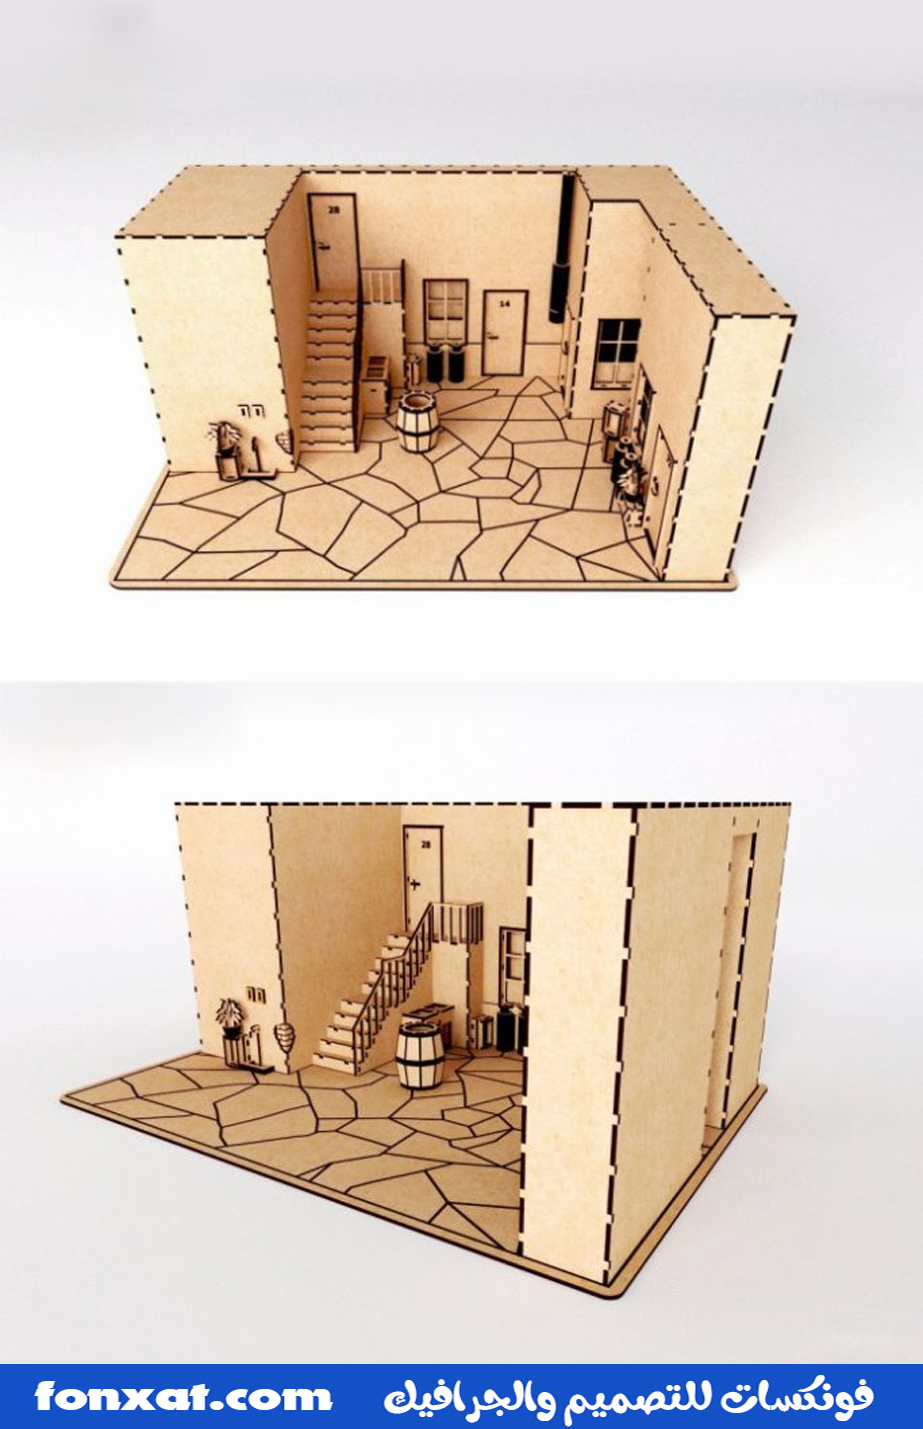 A doll house model – a decoration for a game or a cartoon